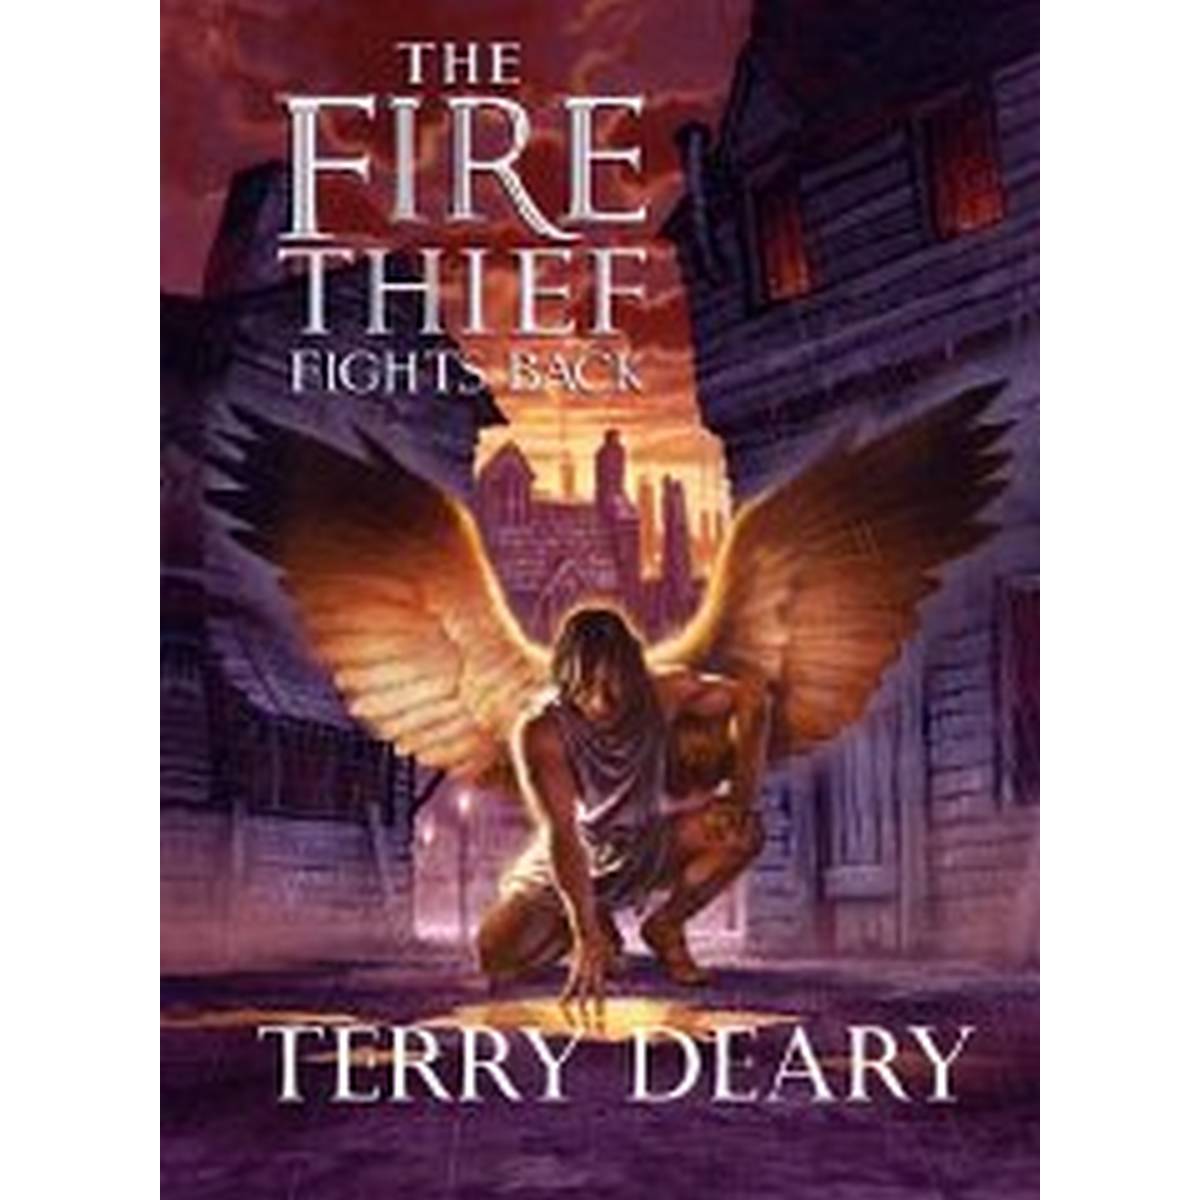 The Fire Thief Fights Back (The Fire Thief Trilogy) Hardback